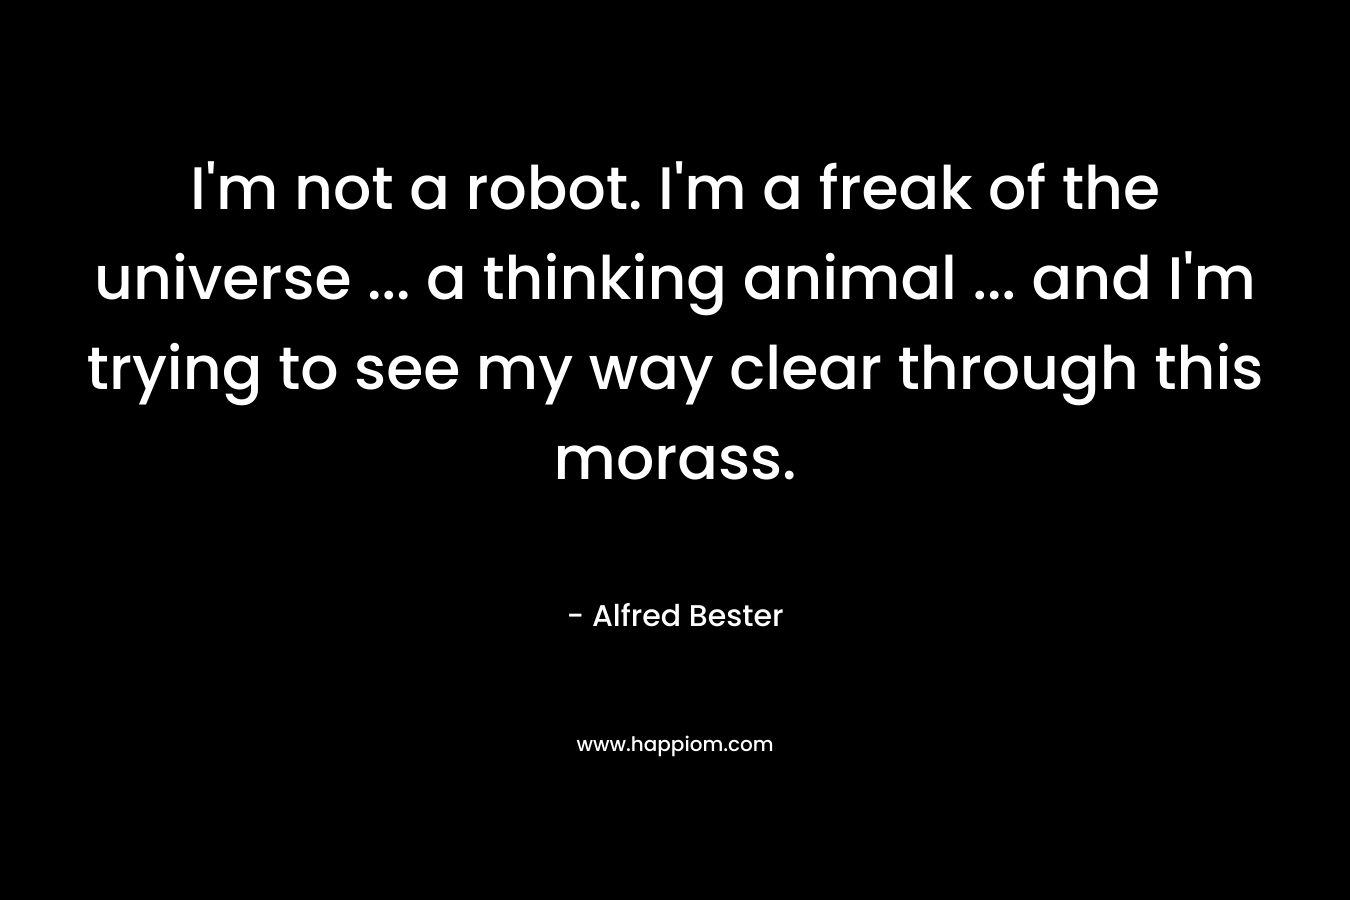 I'm not a robot. I'm a freak of the universe ... a thinking animal ... and I'm trying to see my way clear through this morass.